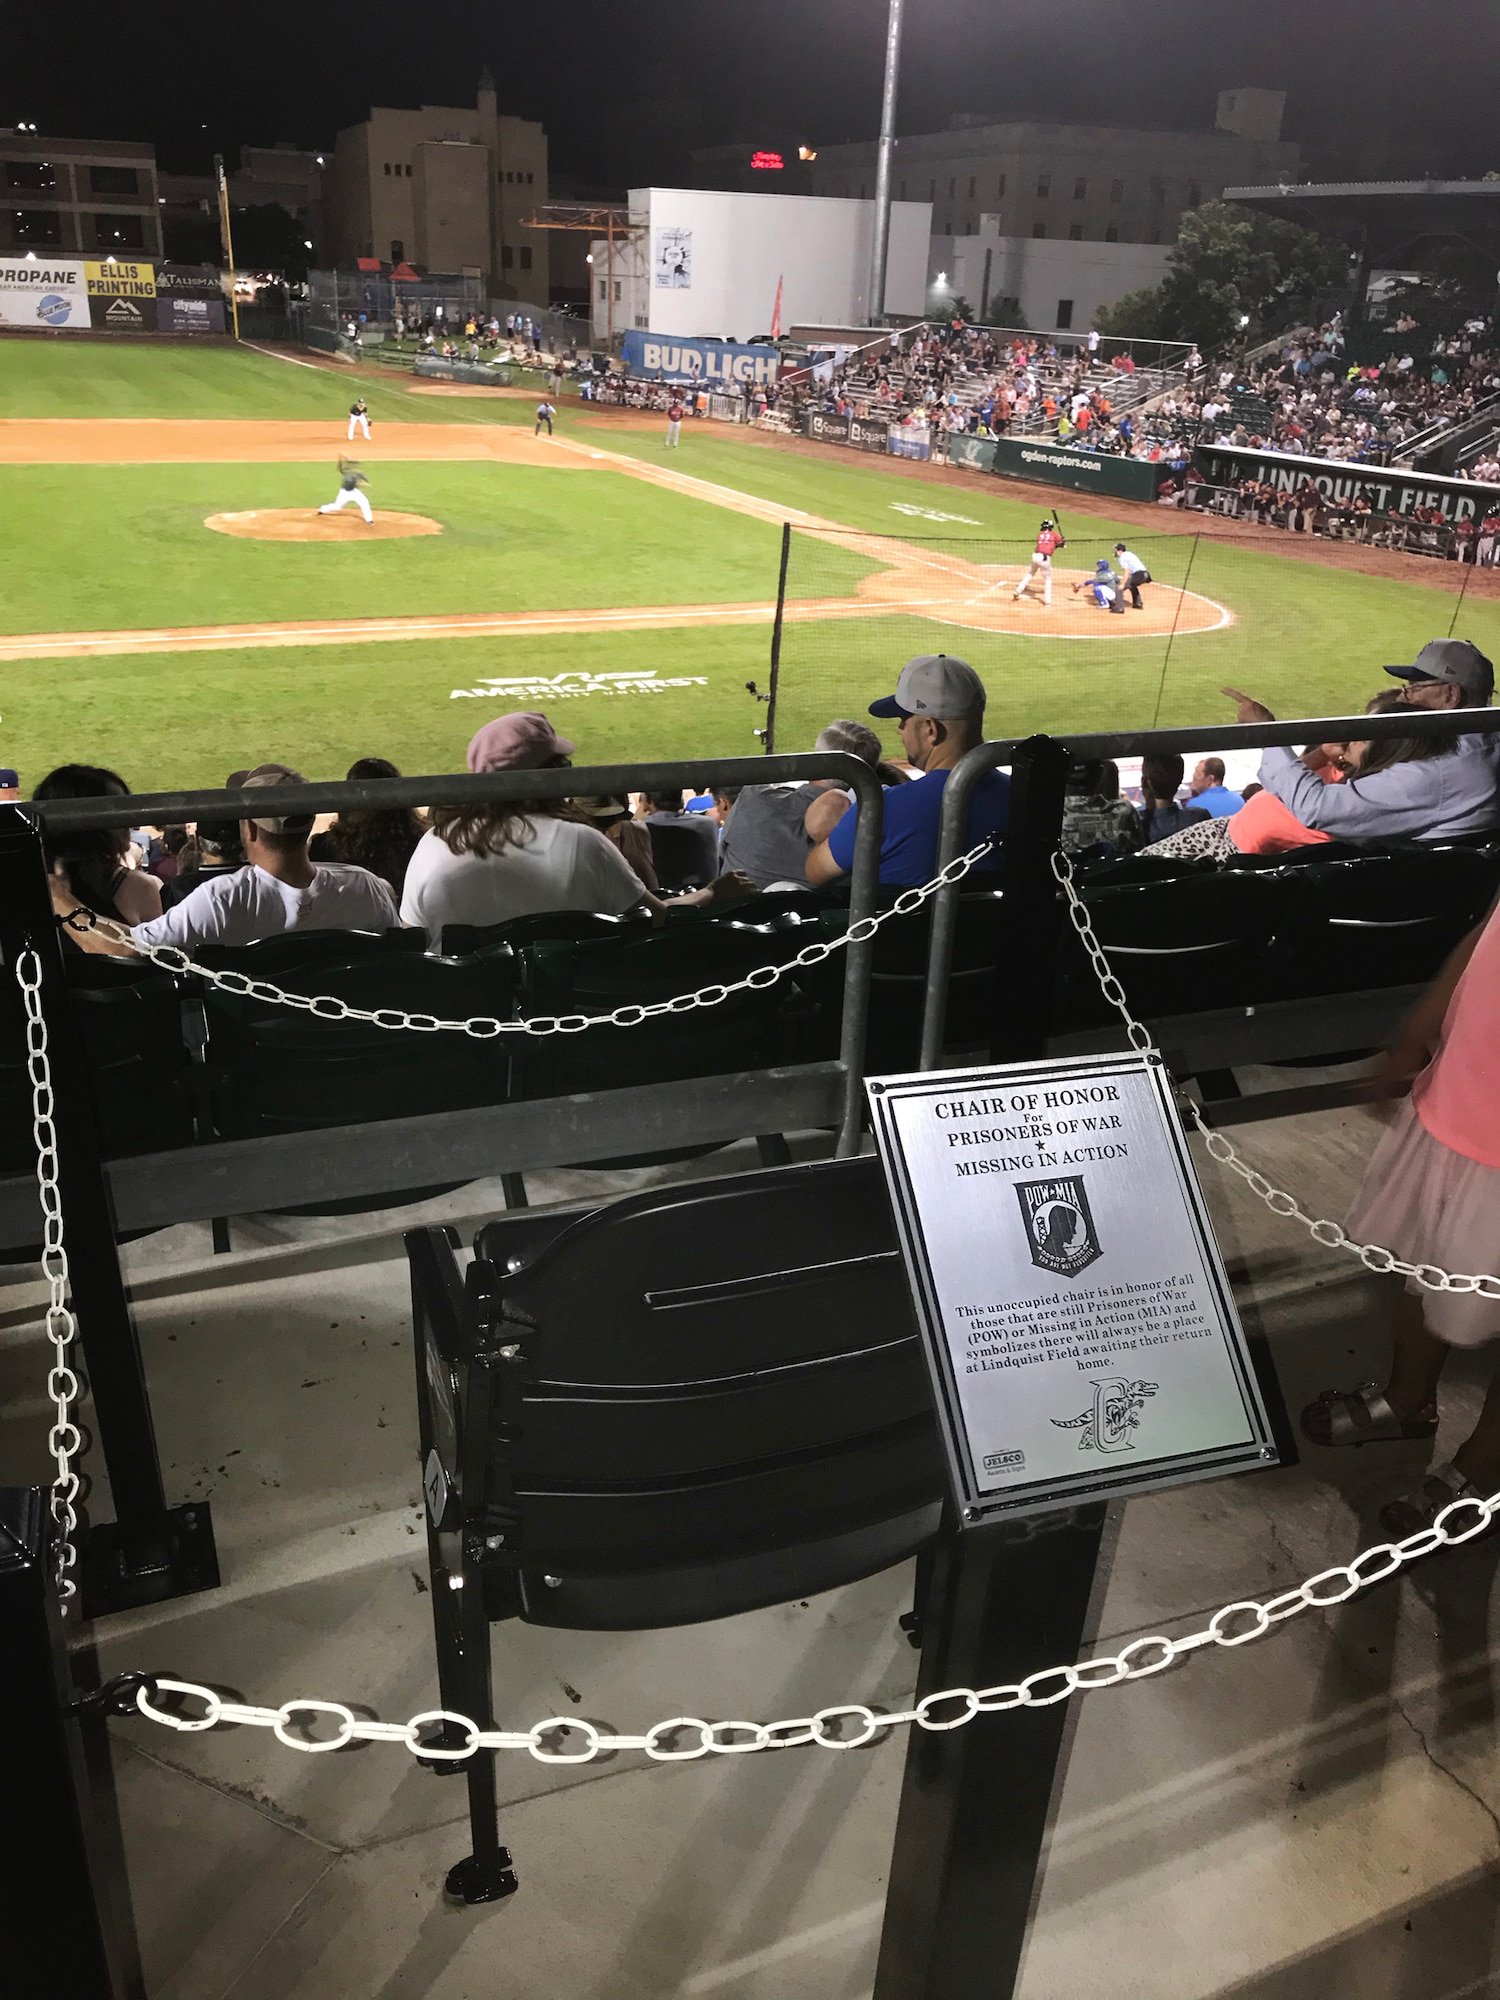 The POW/MIA chair of honor at Lindquist Field in Ogden, Utah. The chair was dedicated Aug. 9, 2019, during Military Appreciation Night with the Ogden Raptors and Idaho Falls Chukars to symbolize that there will always be a place at Lindquist Field awaiting the return home of the nation's POWs/MIAs. (U.S. Air Force photo by David Perry)